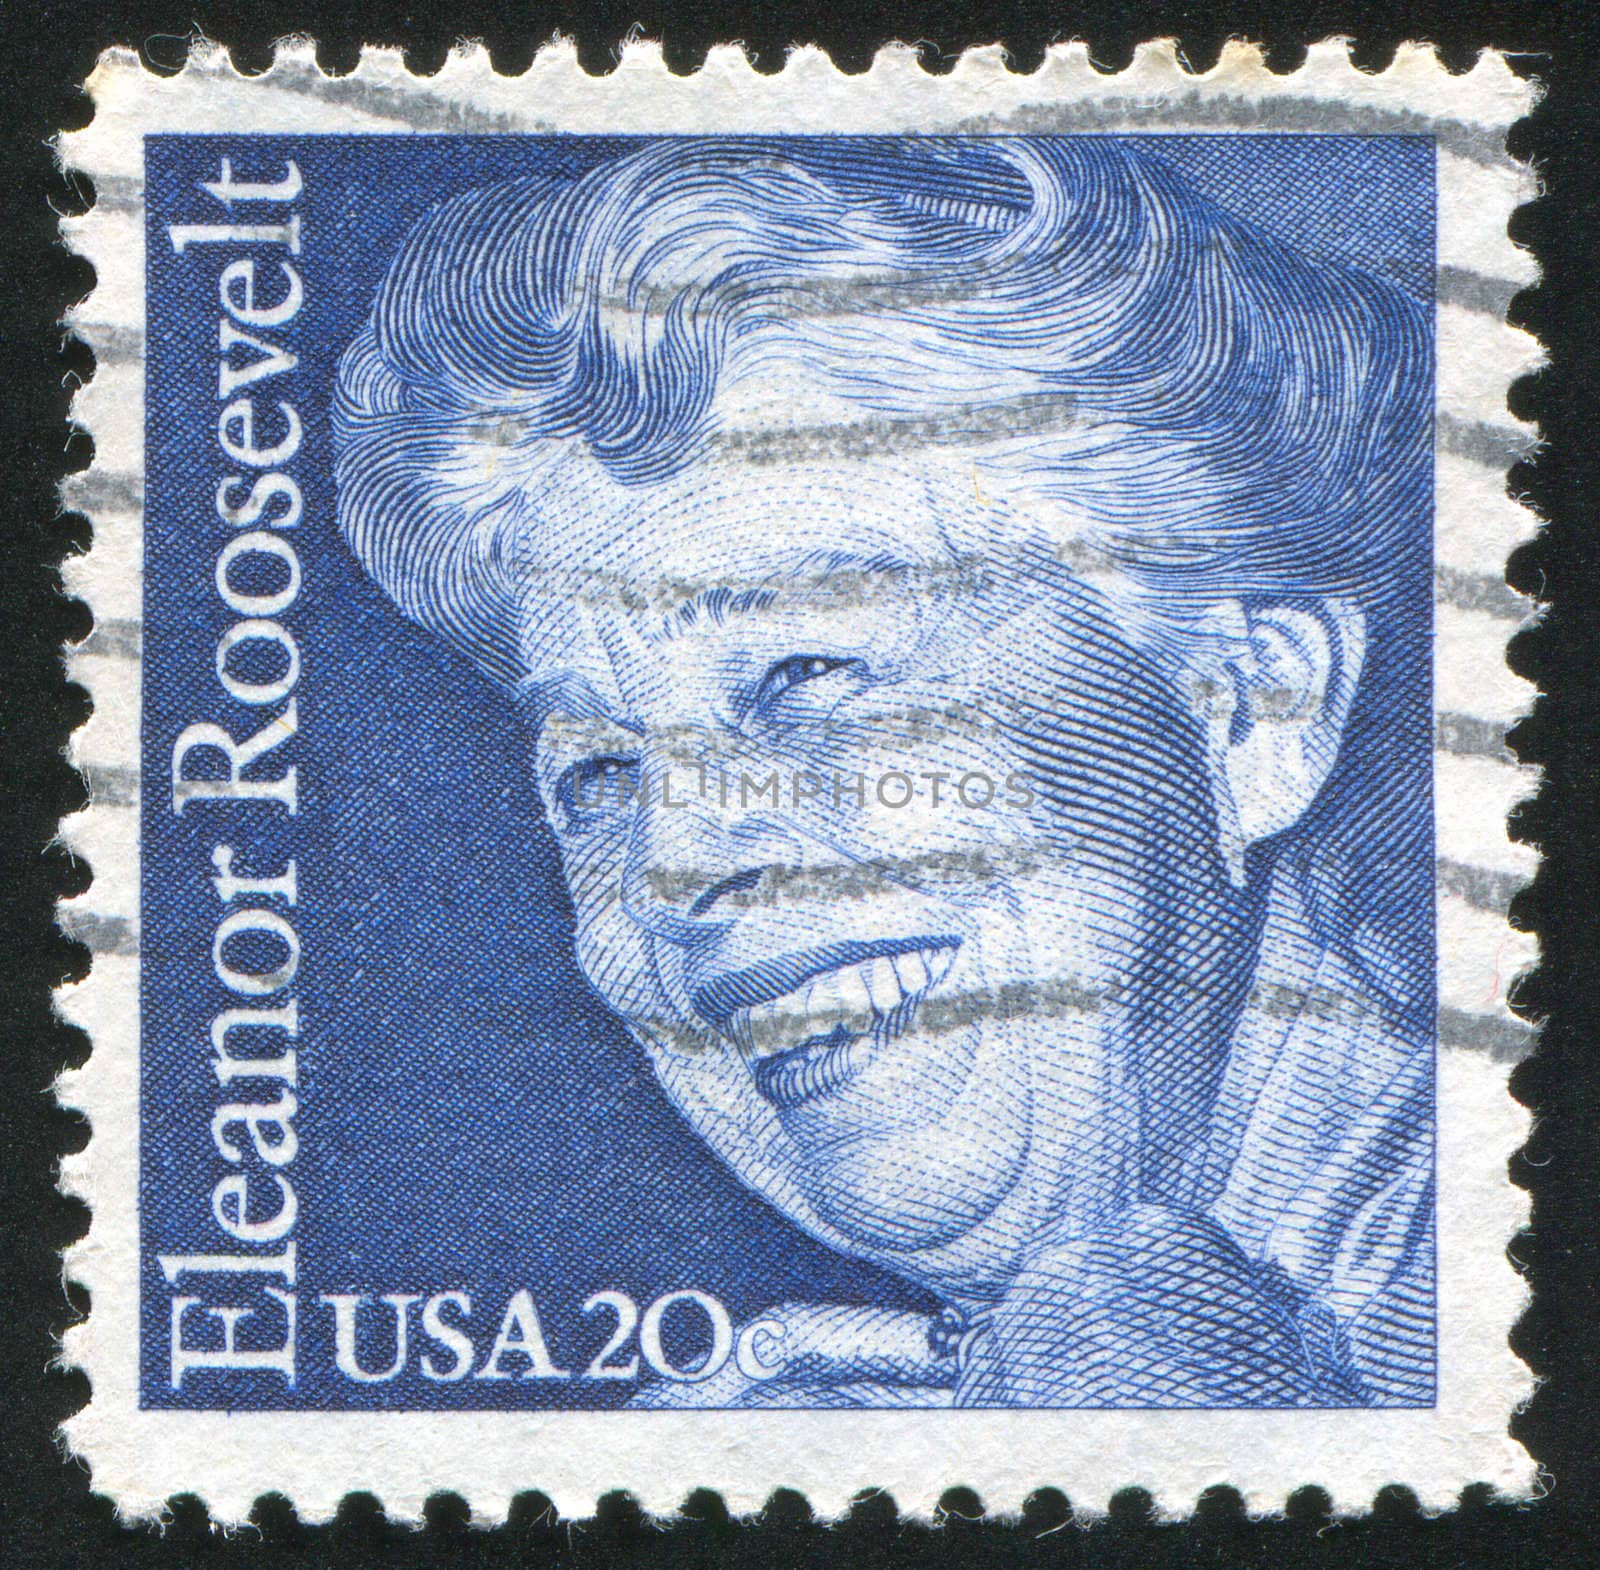 Eleanor Roosevelt by rook